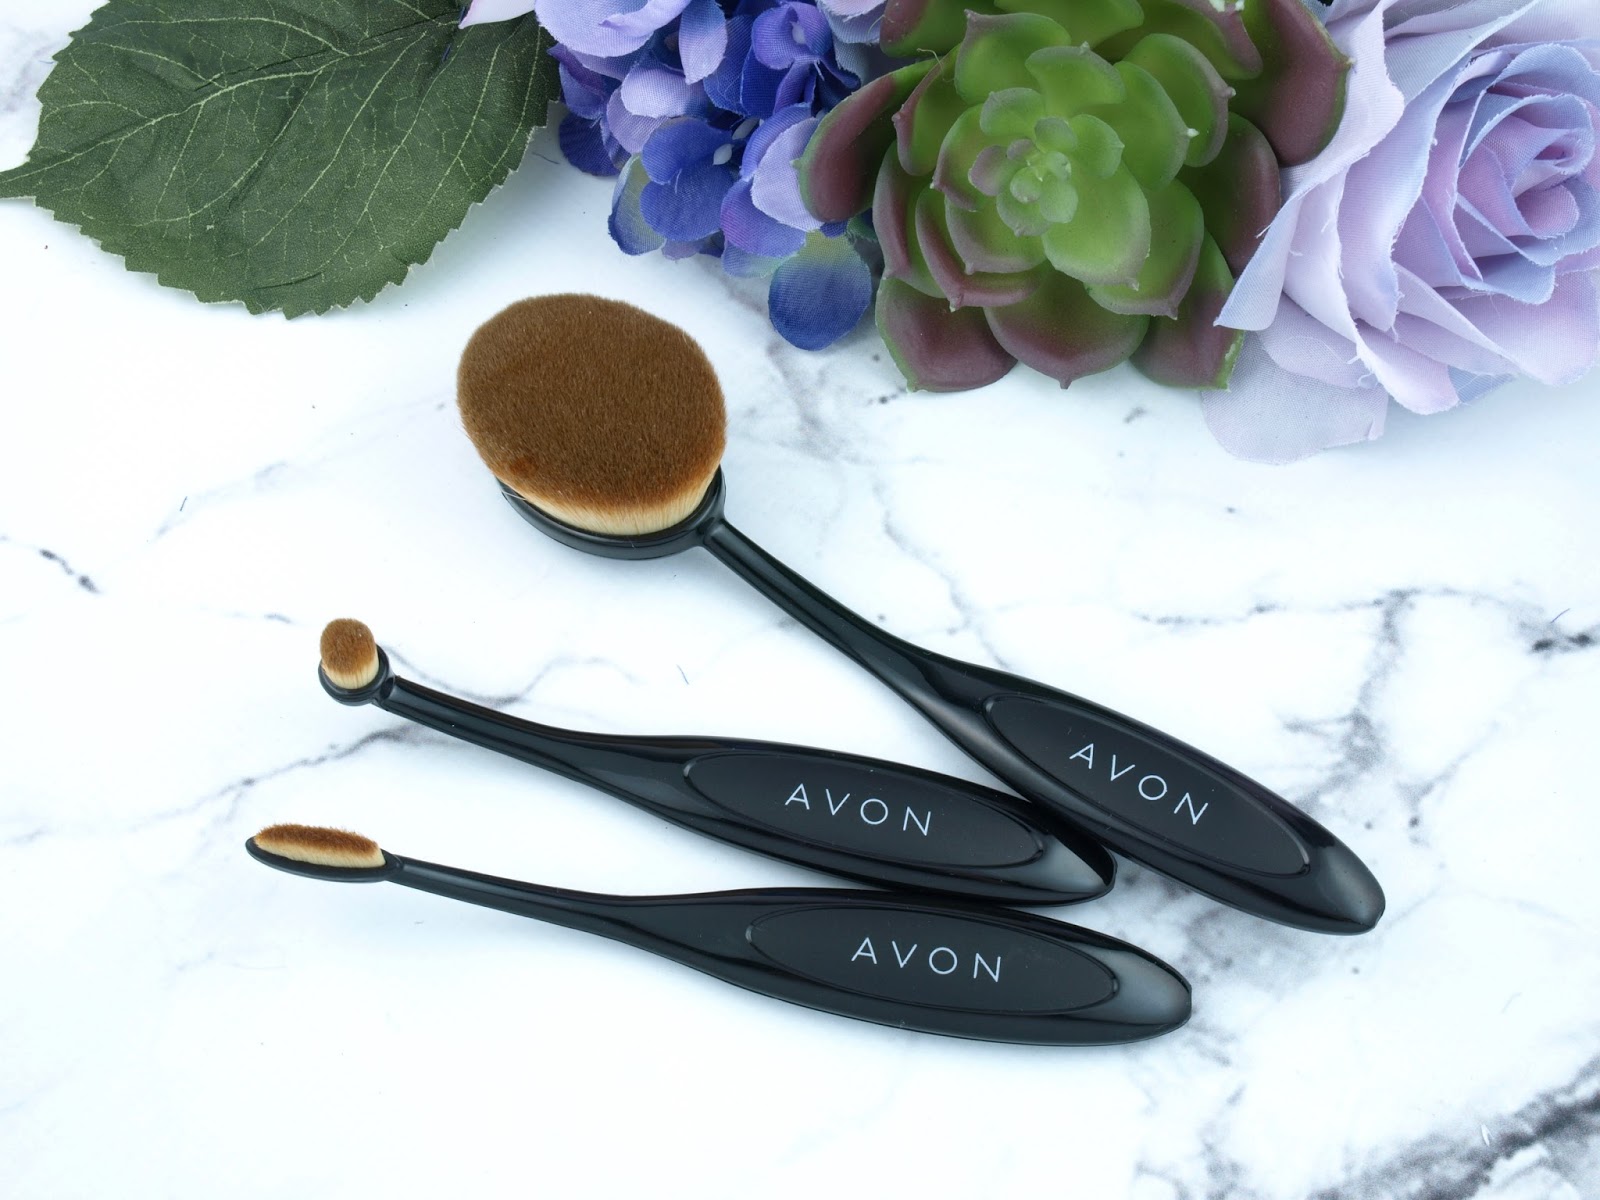 Avon Oval Makeup Brushes: Review